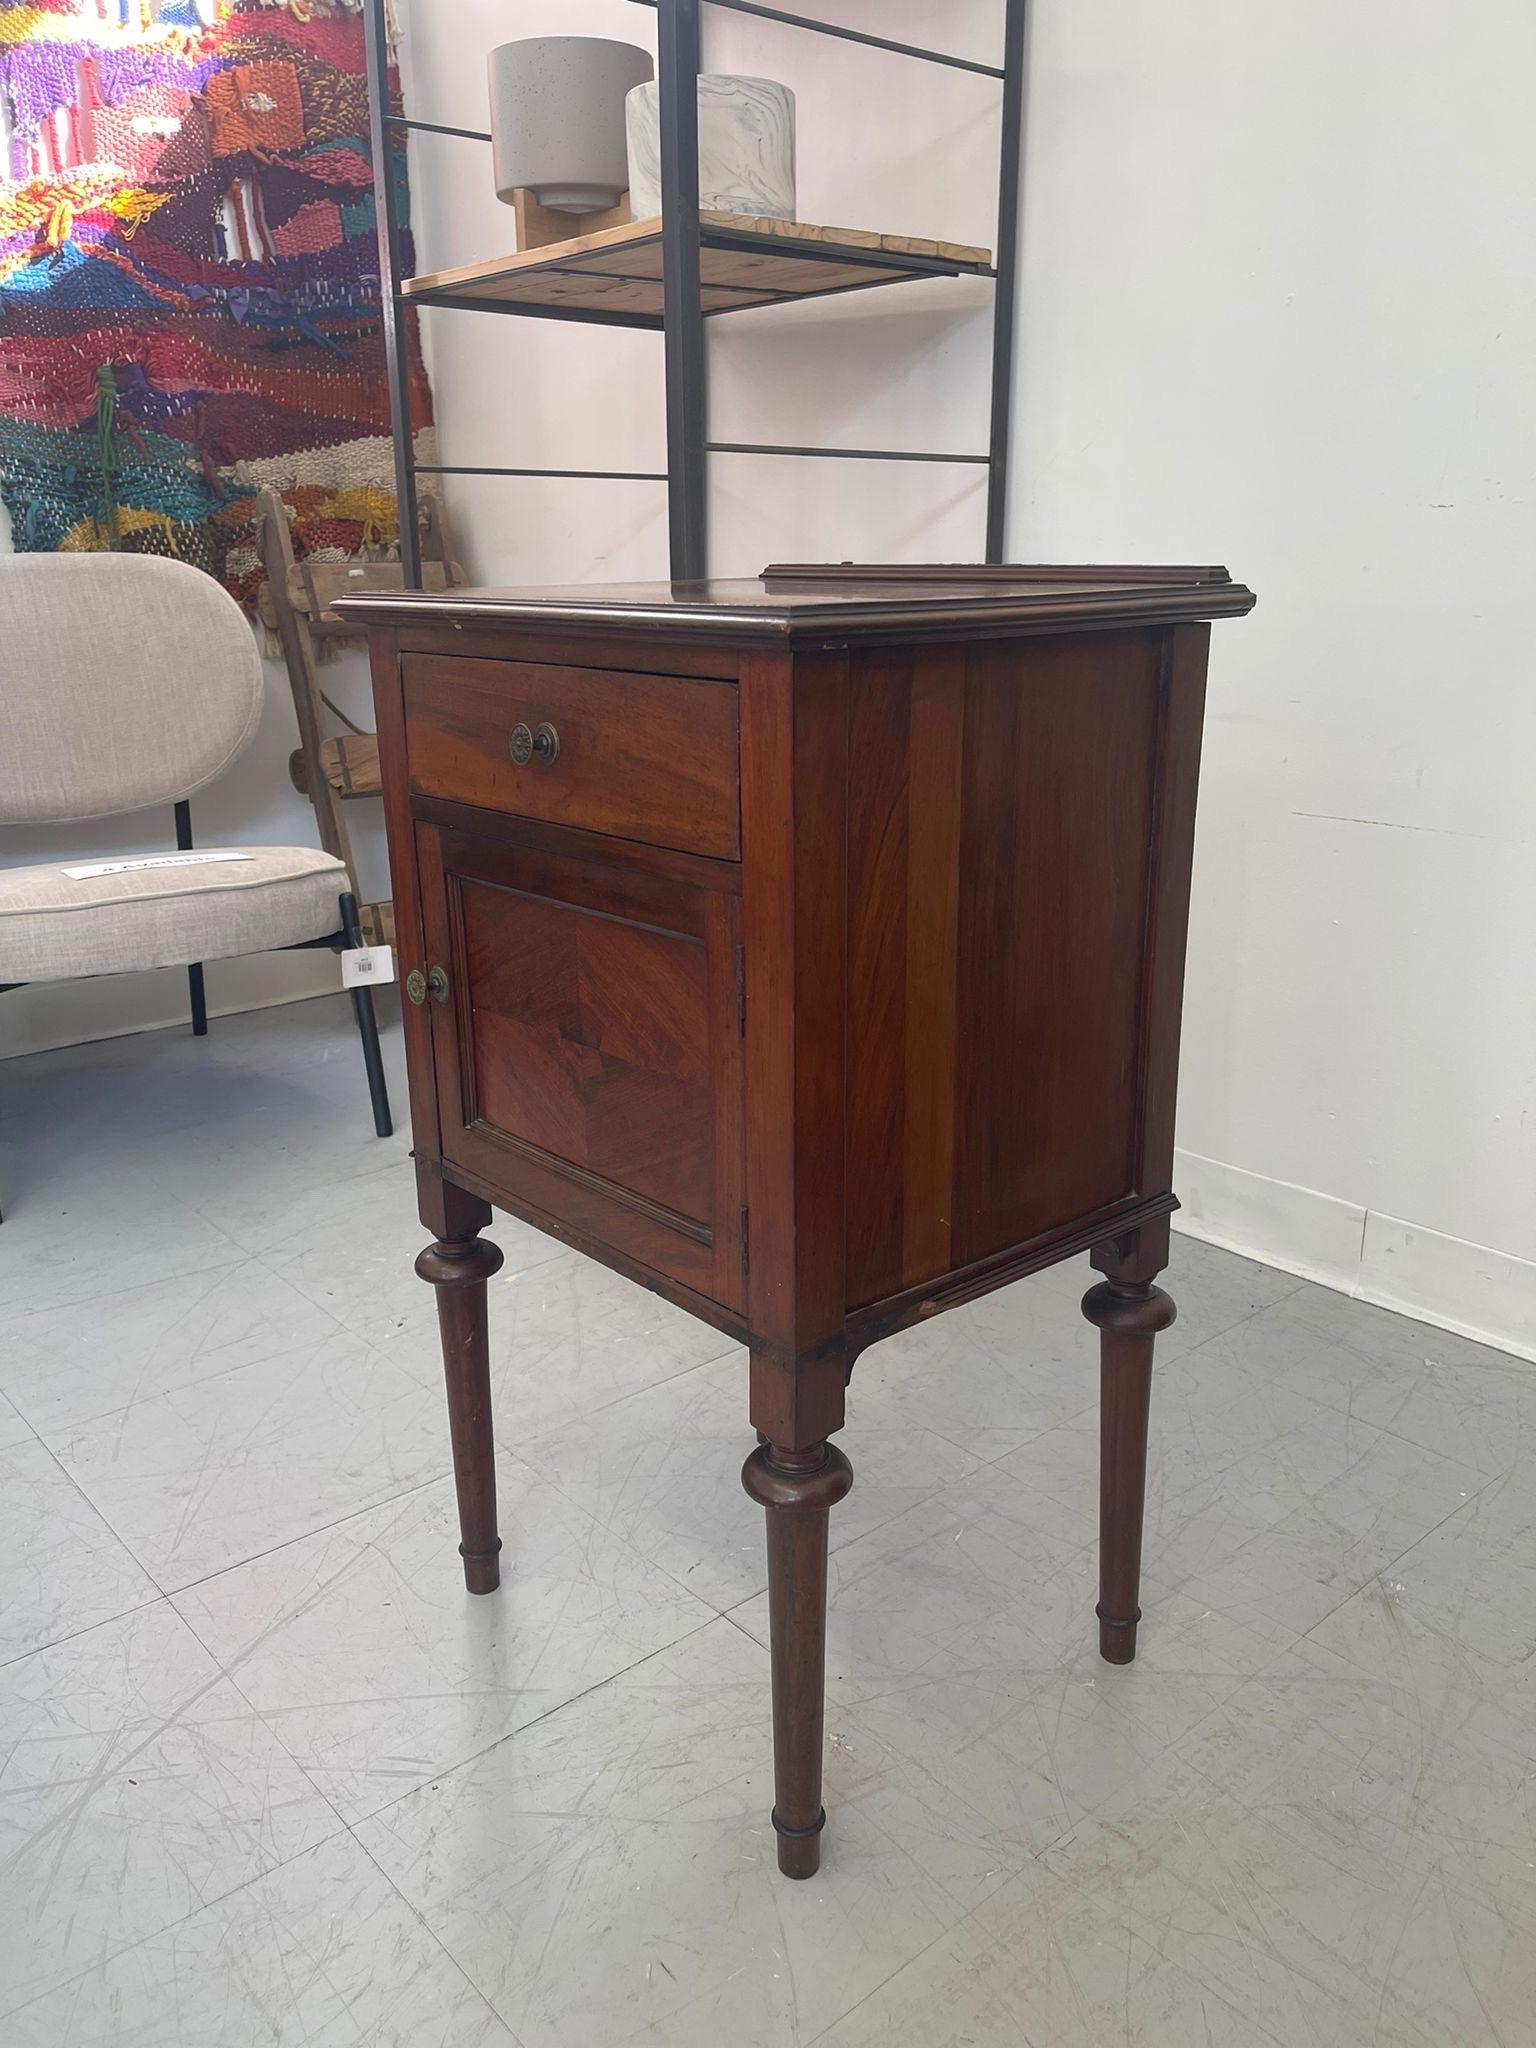 Vintage Accent Table With Dovetail Details Uk Import In Good Condition For Sale In Seattle, WA